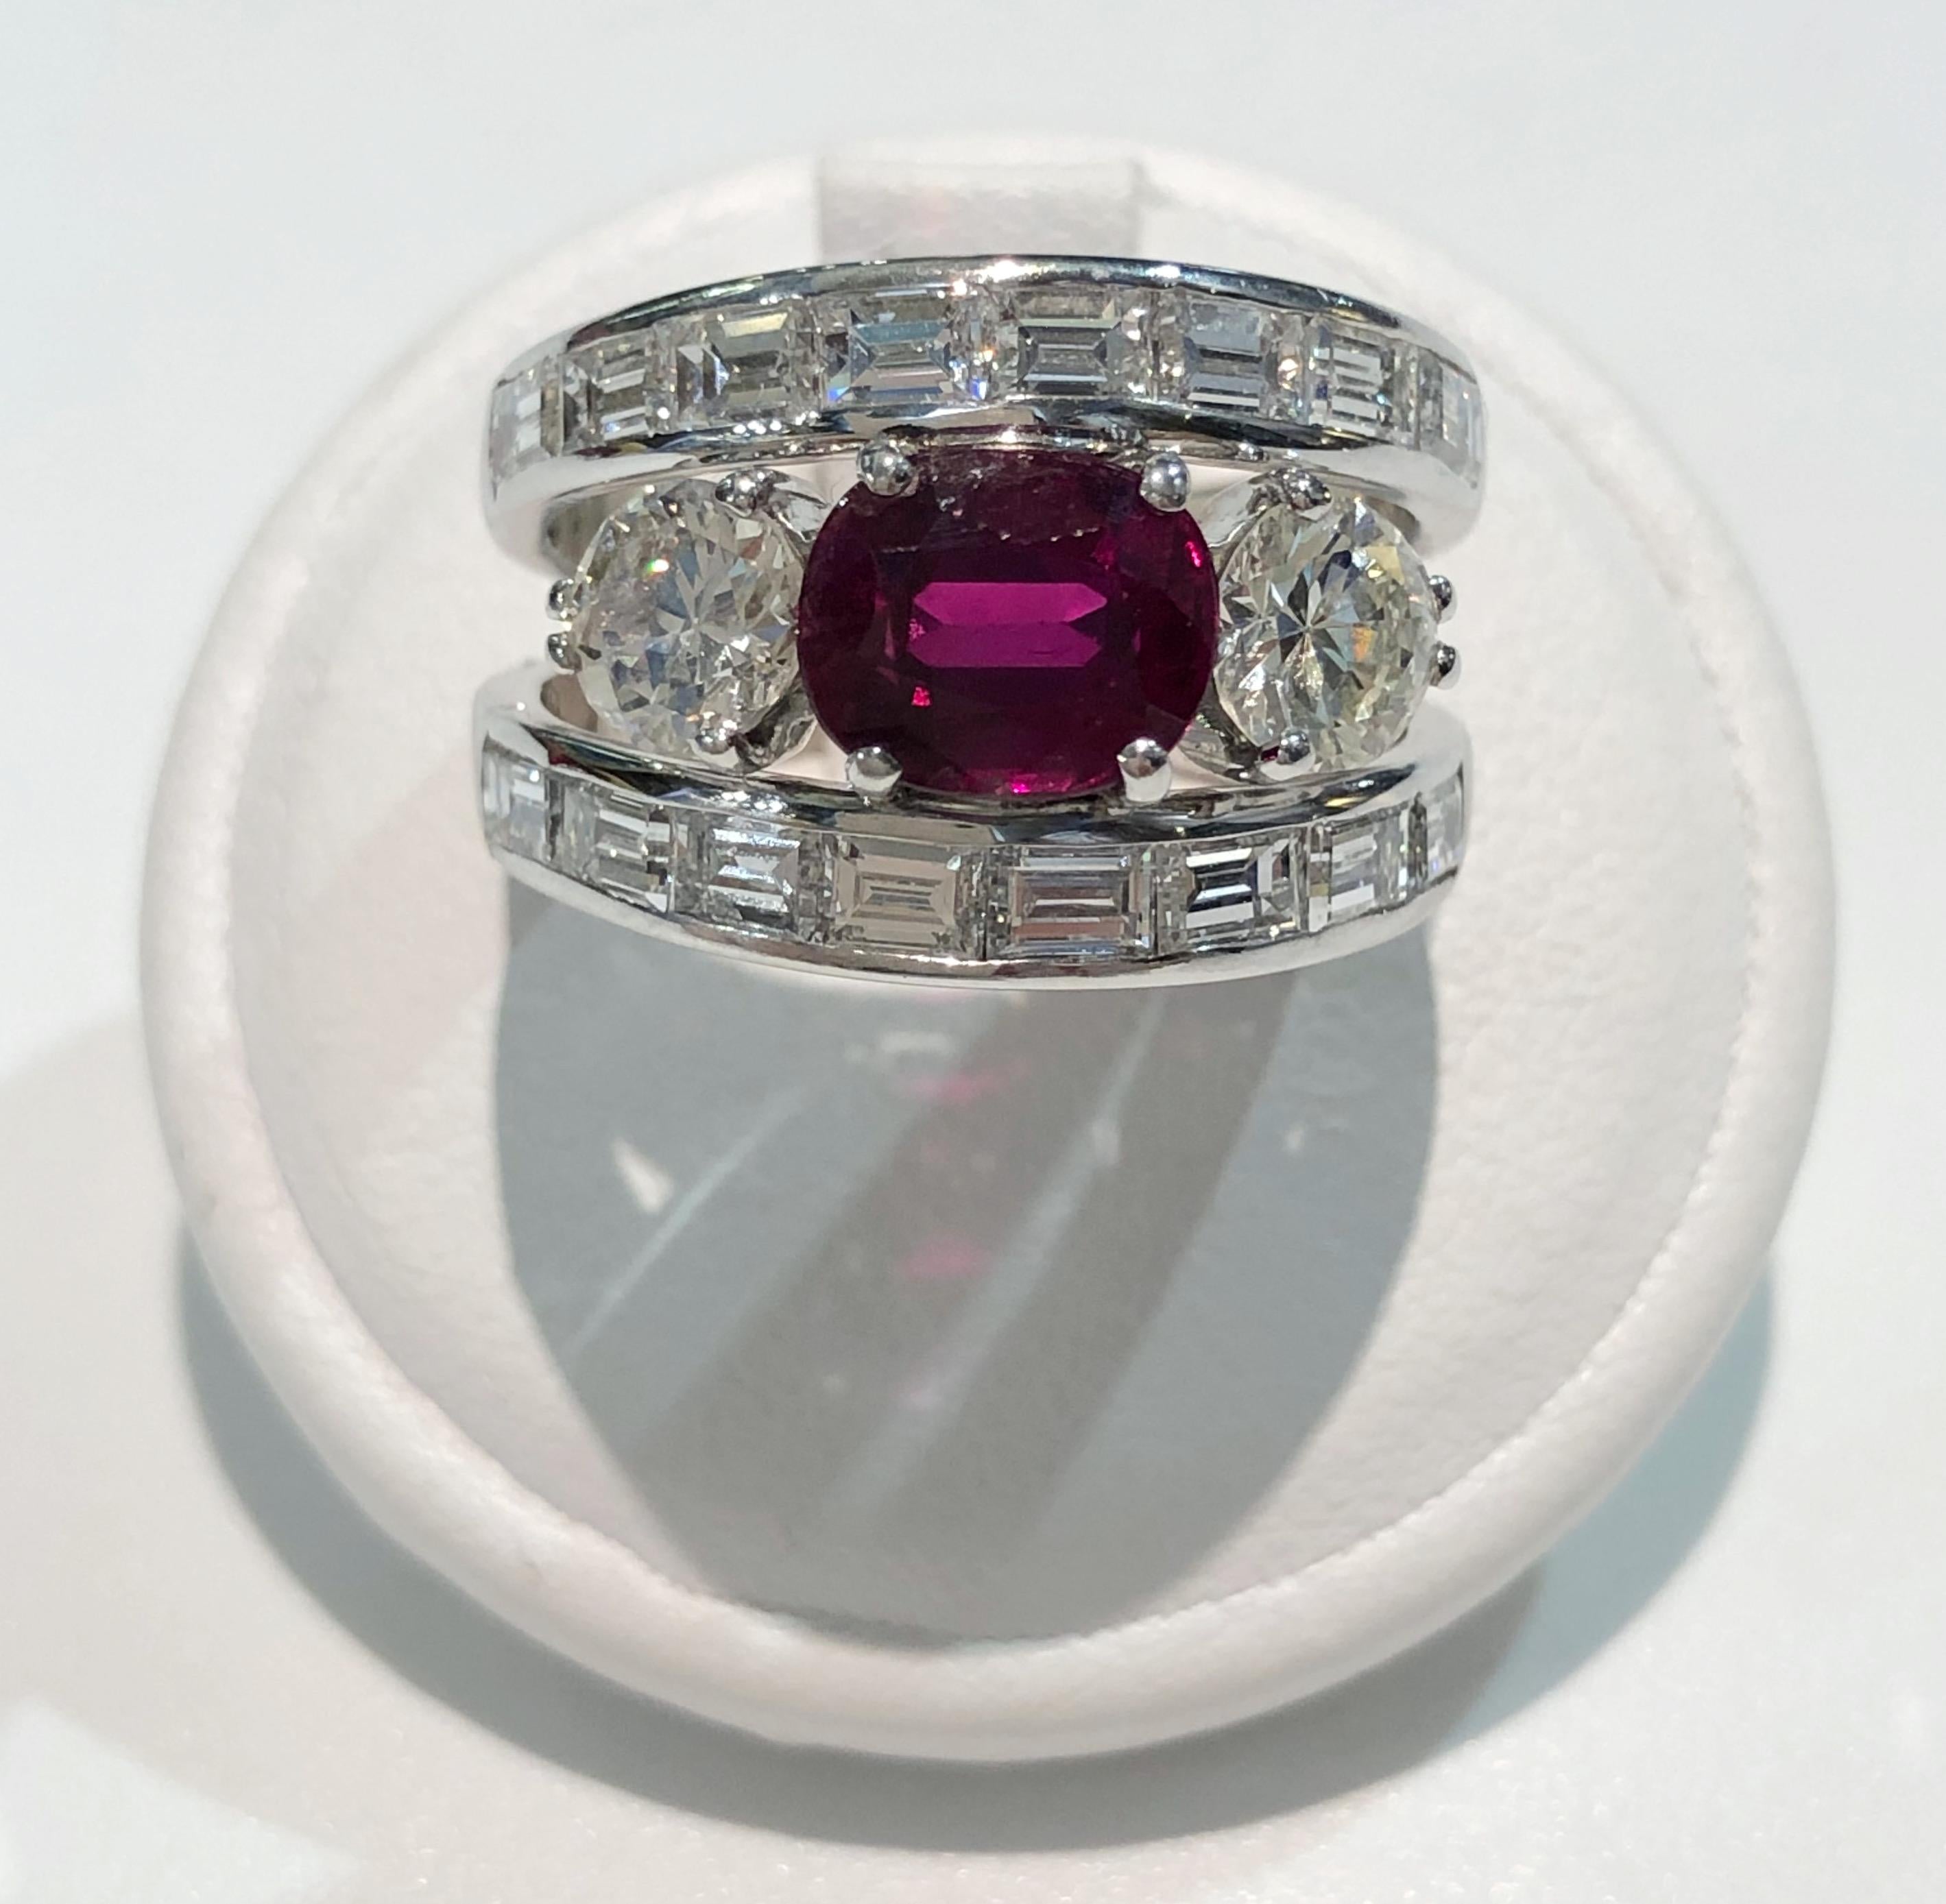 Vintage ring with 18 karat white gold band, ruby, and brilliant diamonds for a total of 2.6 karats, Italy 1950s
Ring size US 5